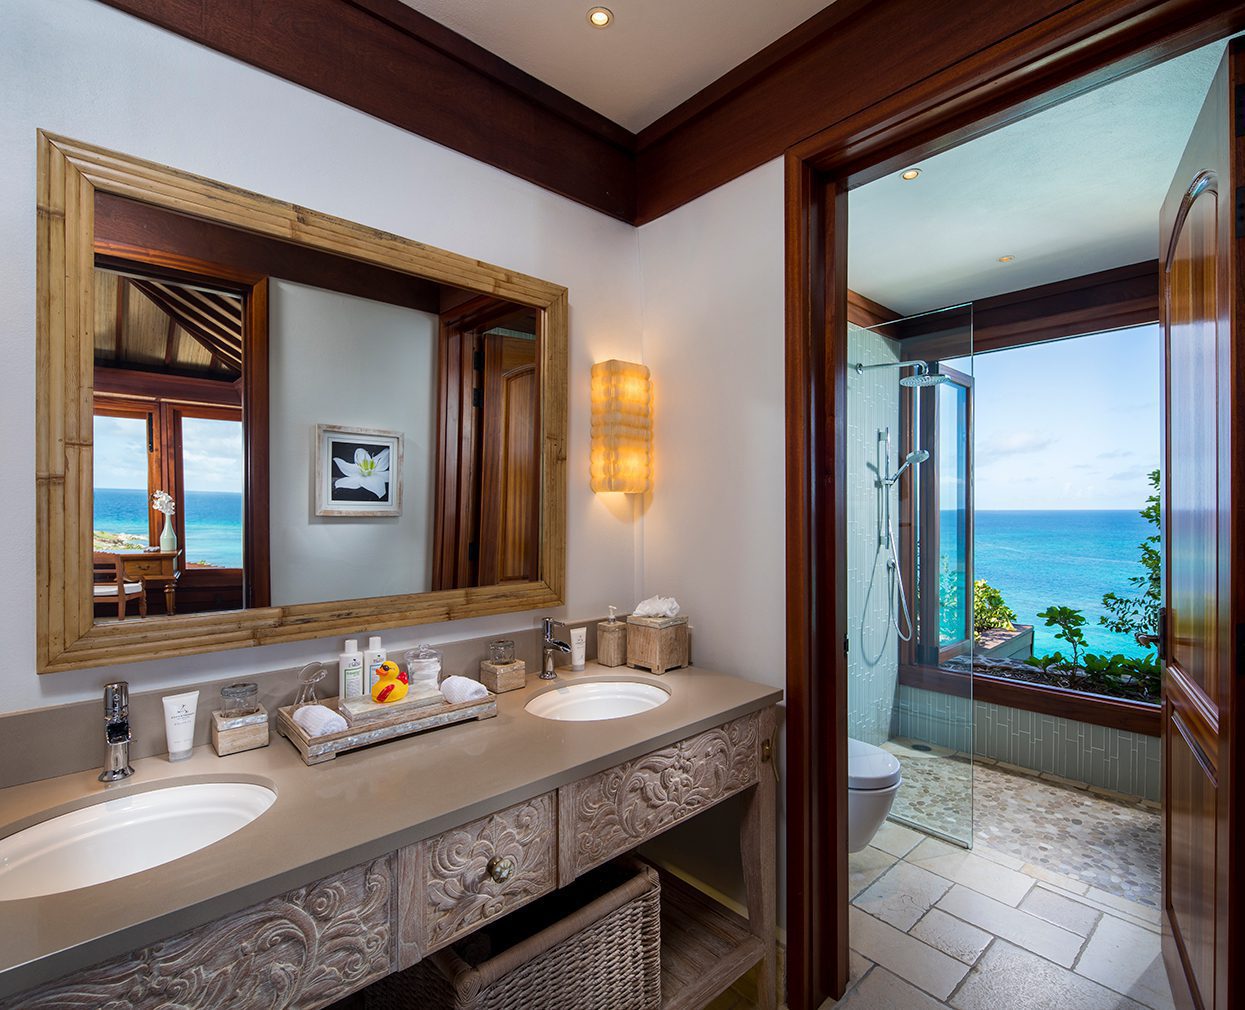 Even bathrooms come with fantastic views at Necker Island